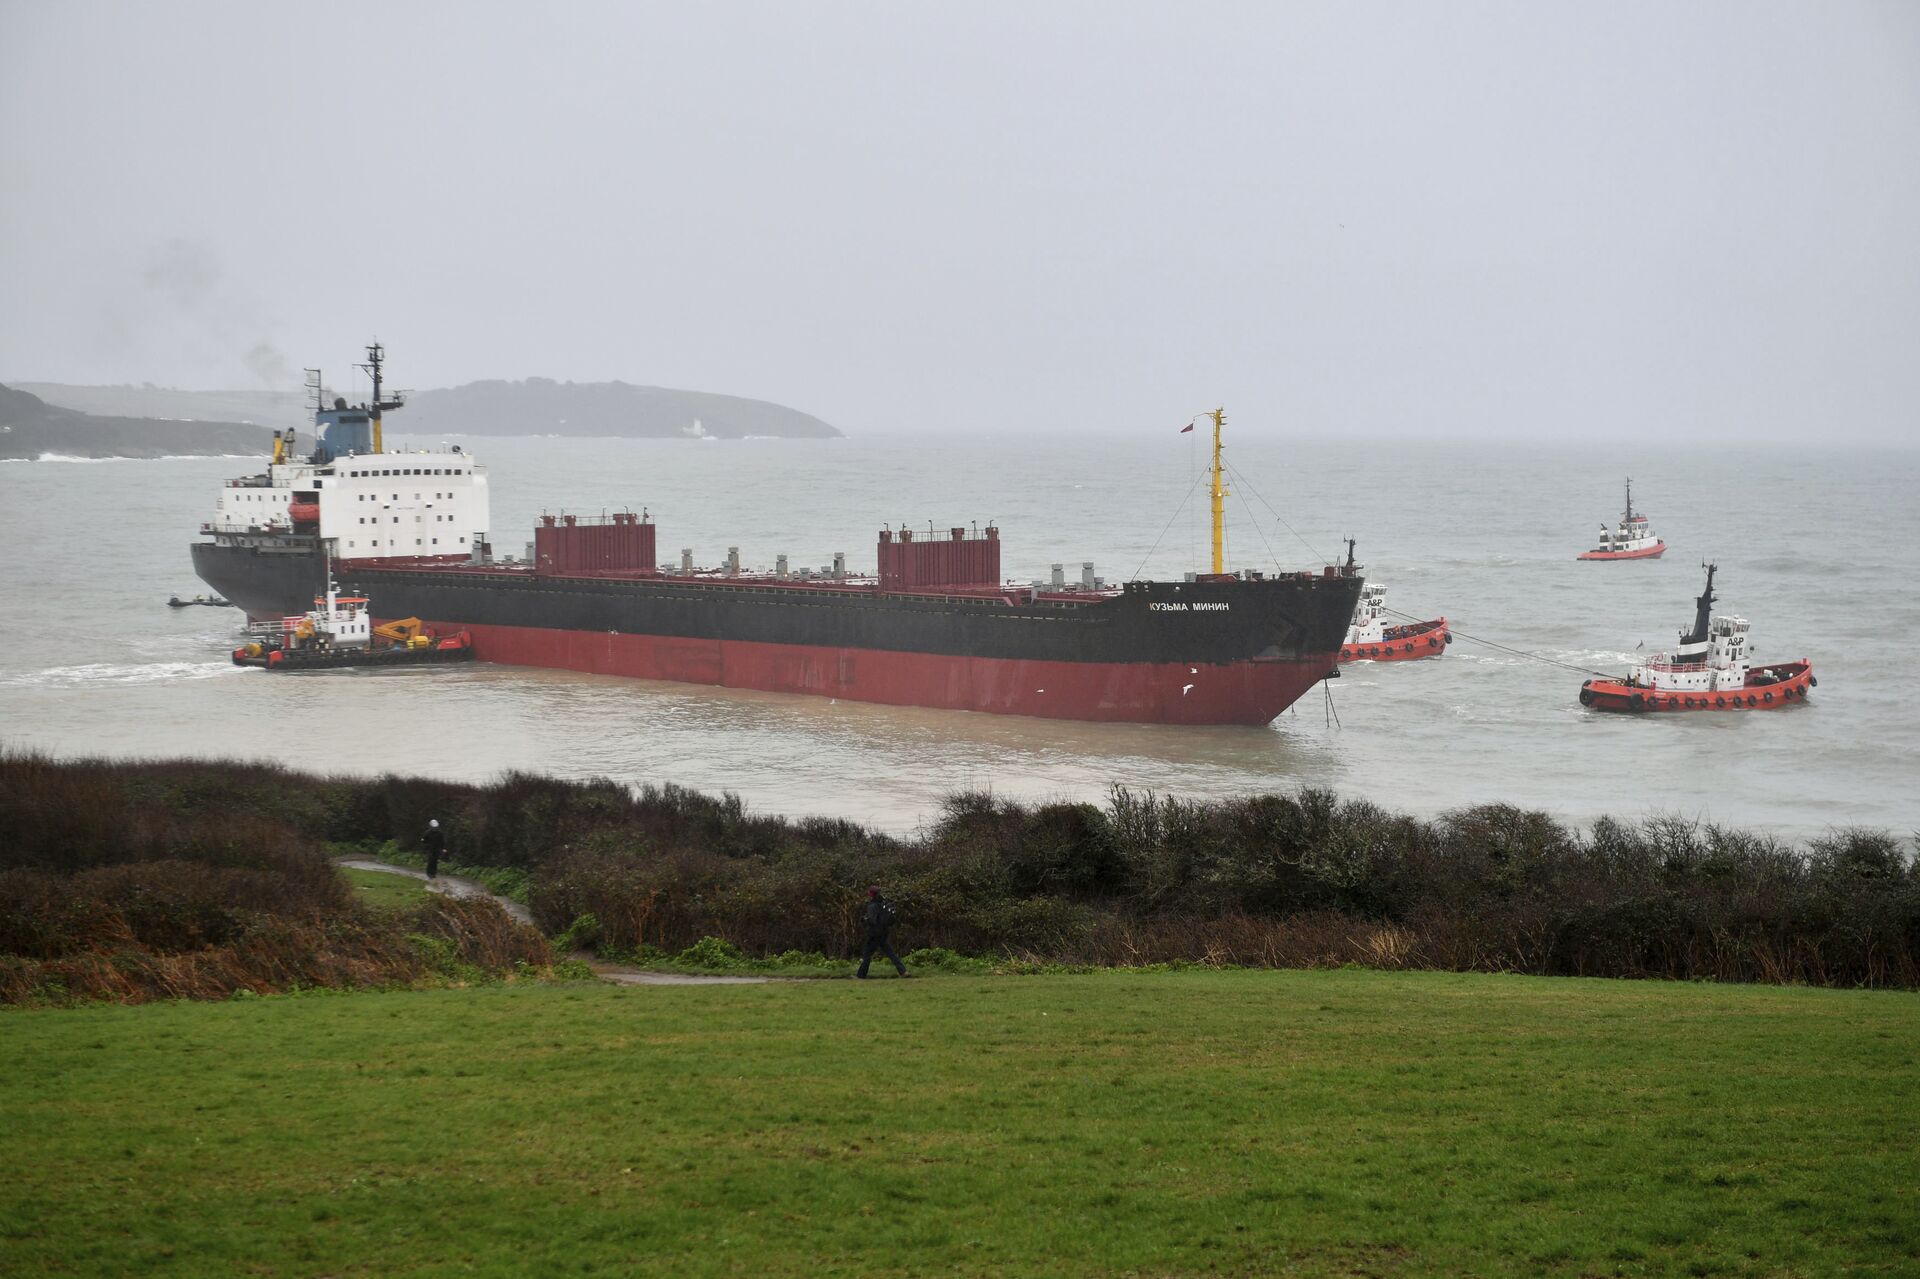 Tugs manoeuvre the Kuzma Minin, a 16,000-tonne Russian cargo ship, as attempts are made to refloat it after it ran aground off Gyllyngvase Beach in Falmouth, south west England, Tuesday Dec. 18, 2018 - Sputnik India, 1920, 07.11.2023